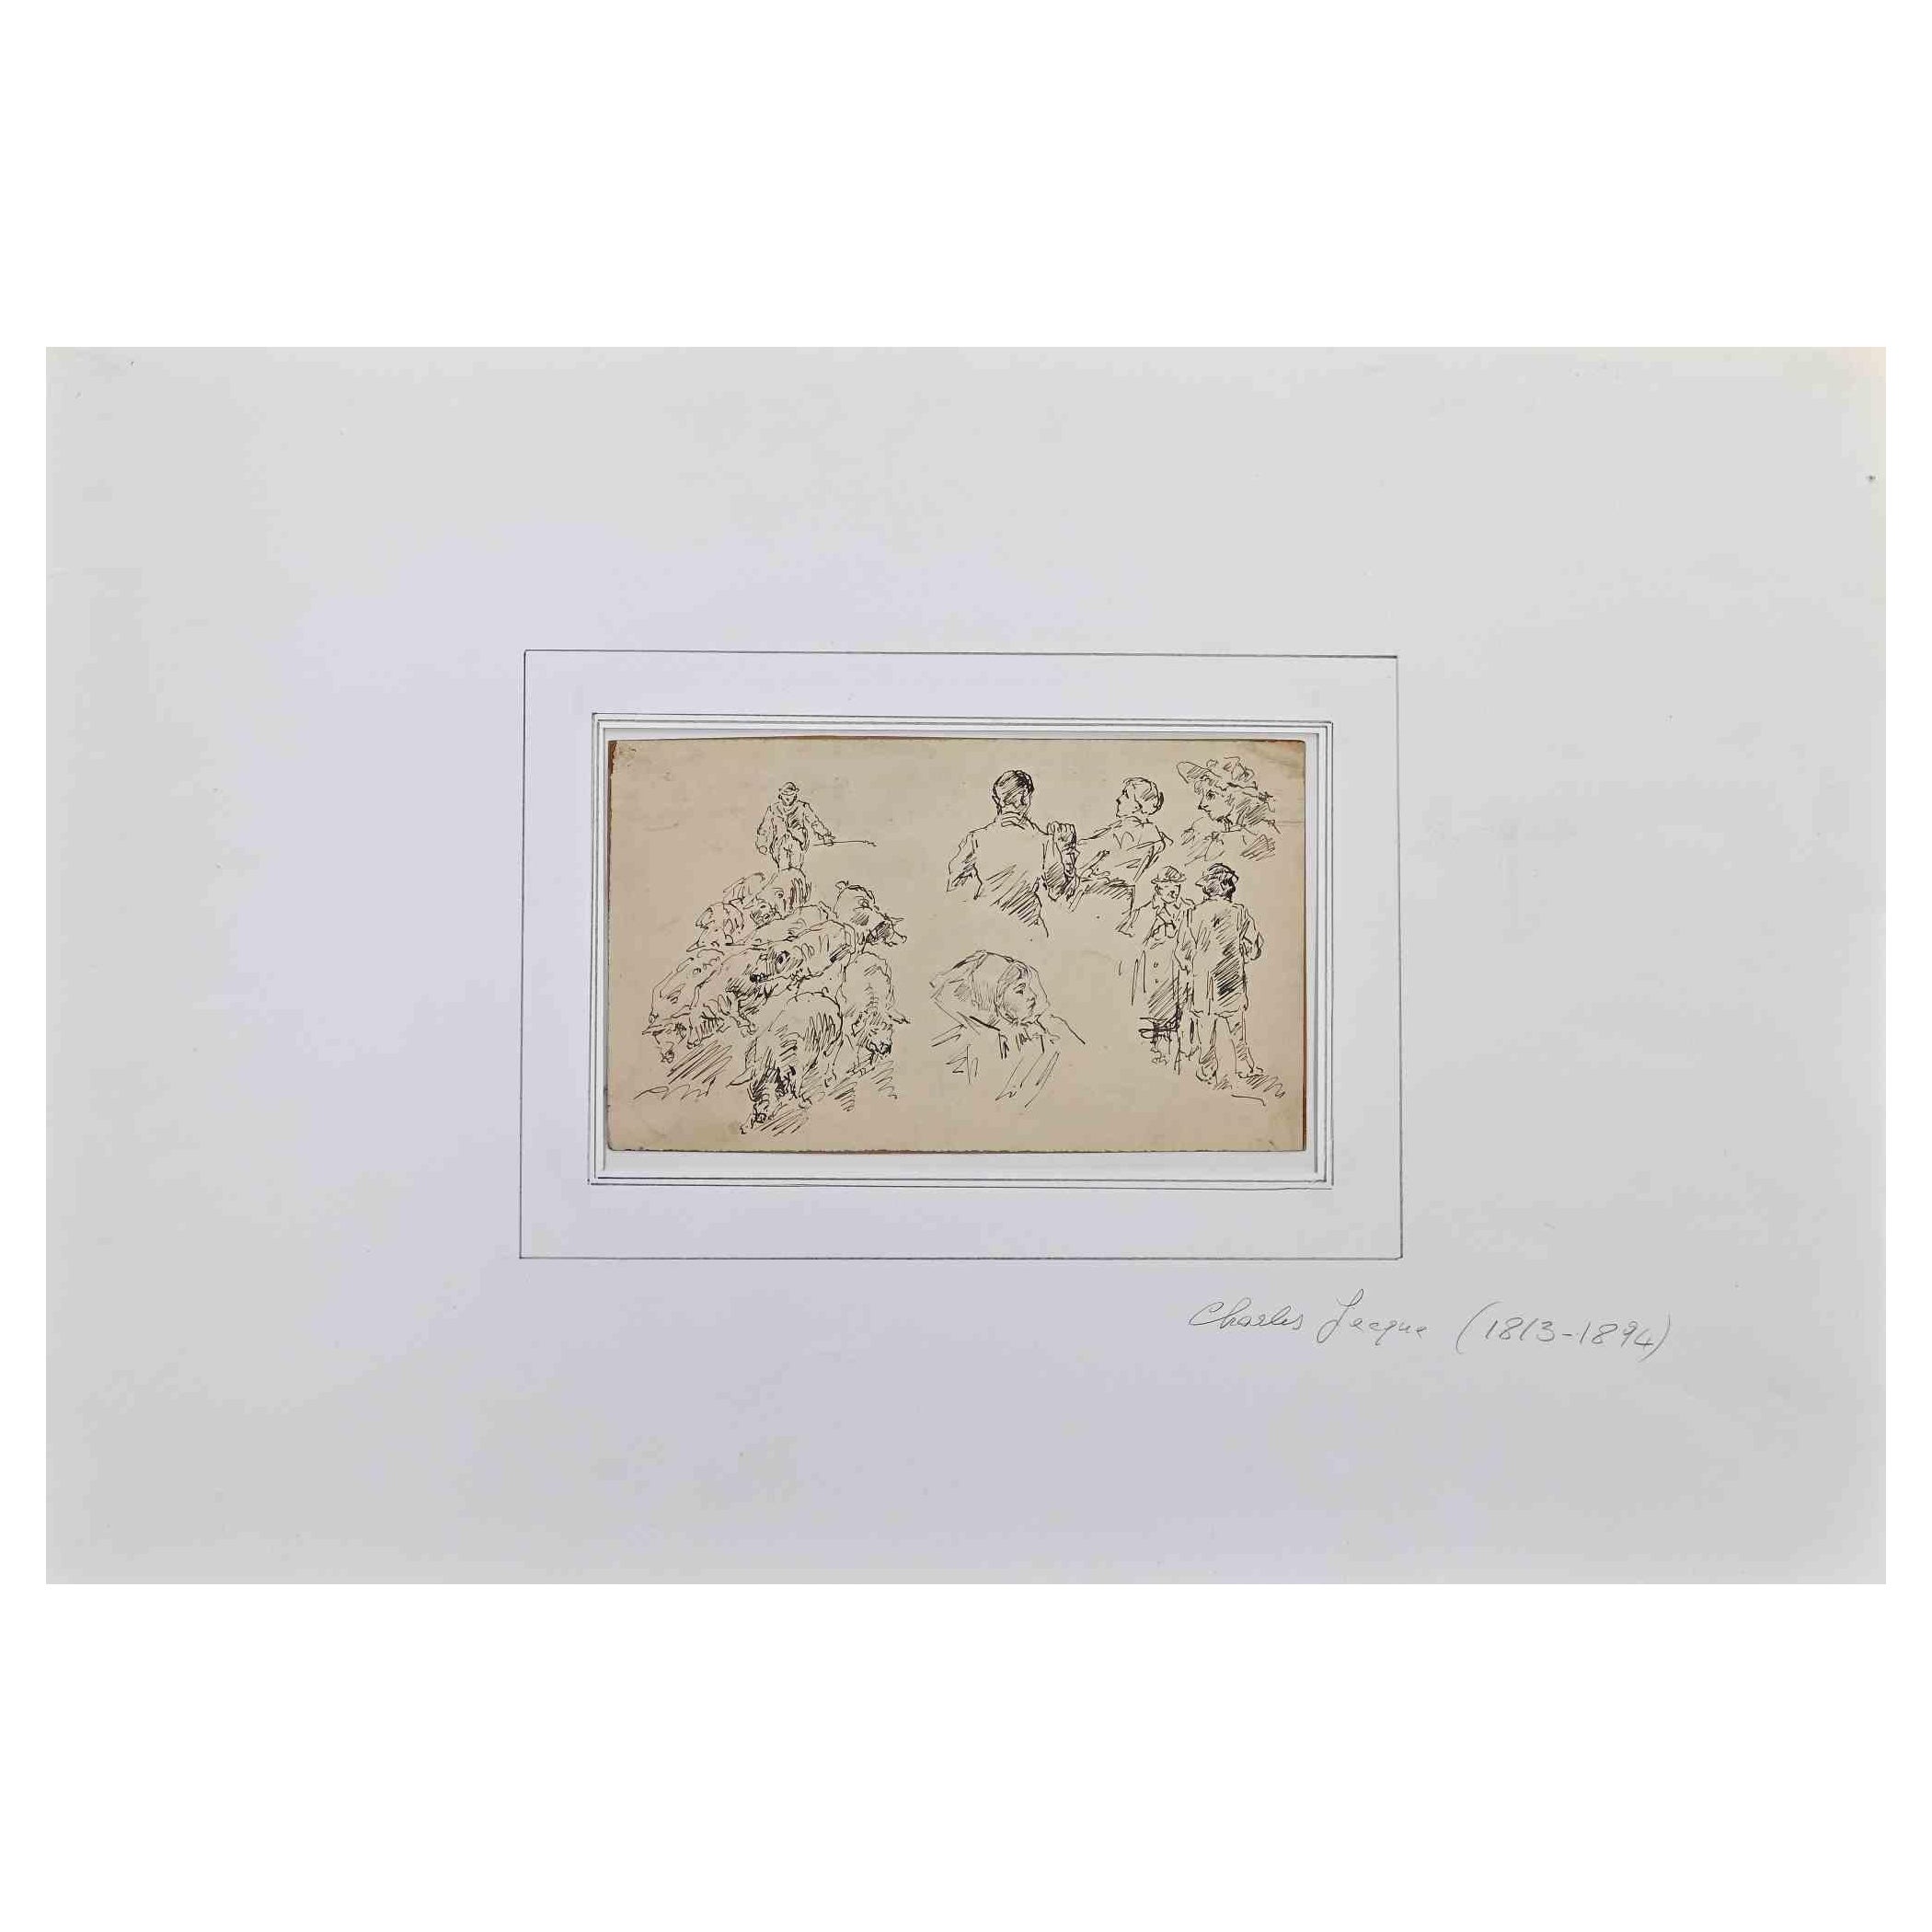  Figures - Original Drawing on Paper by Charles Jacque - Mid 19th Century